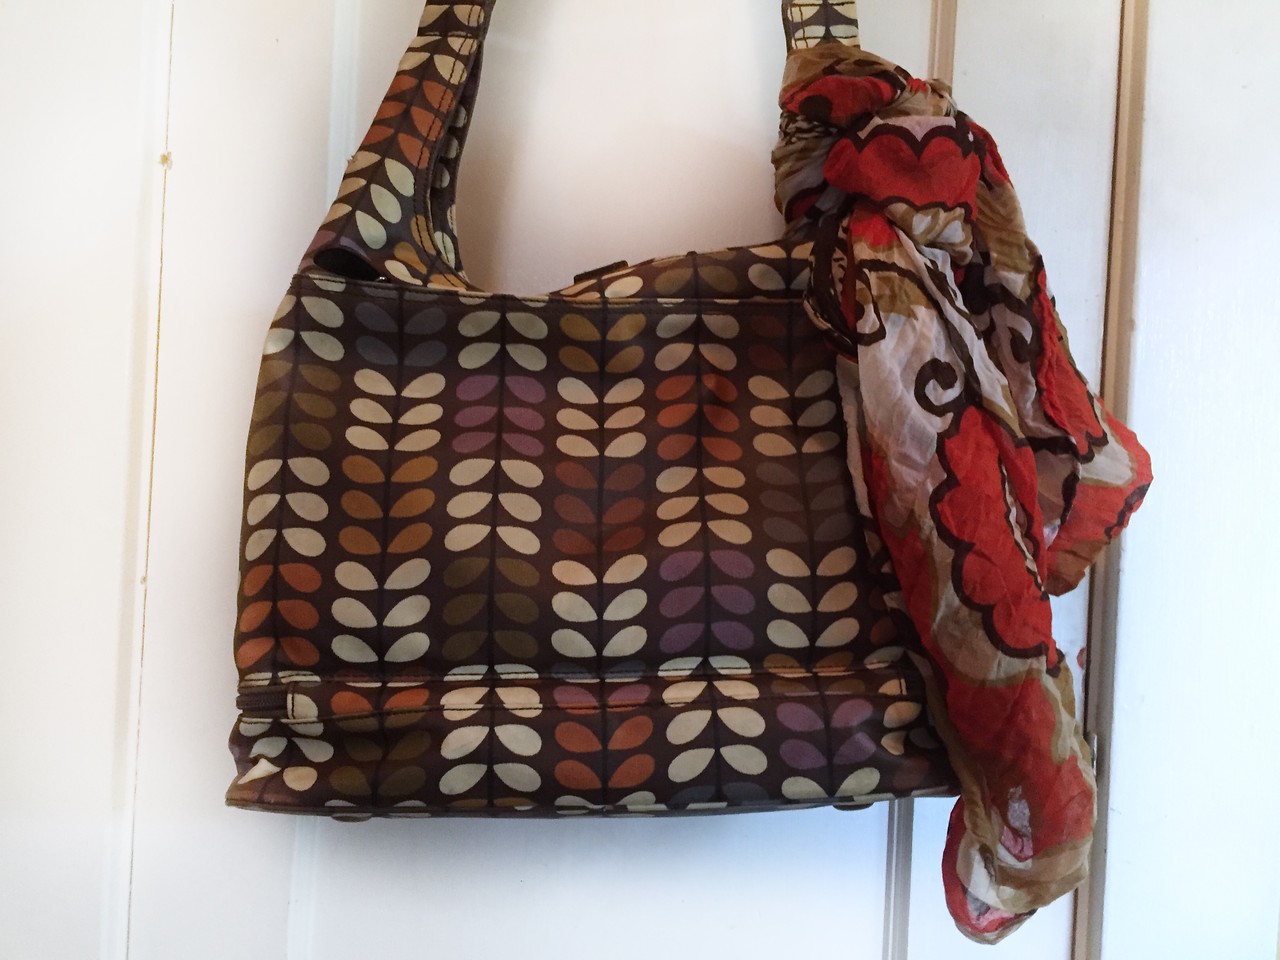 Orla Kiely diaper changing bag with multicolor infinity scarf tied to handle hanging on door